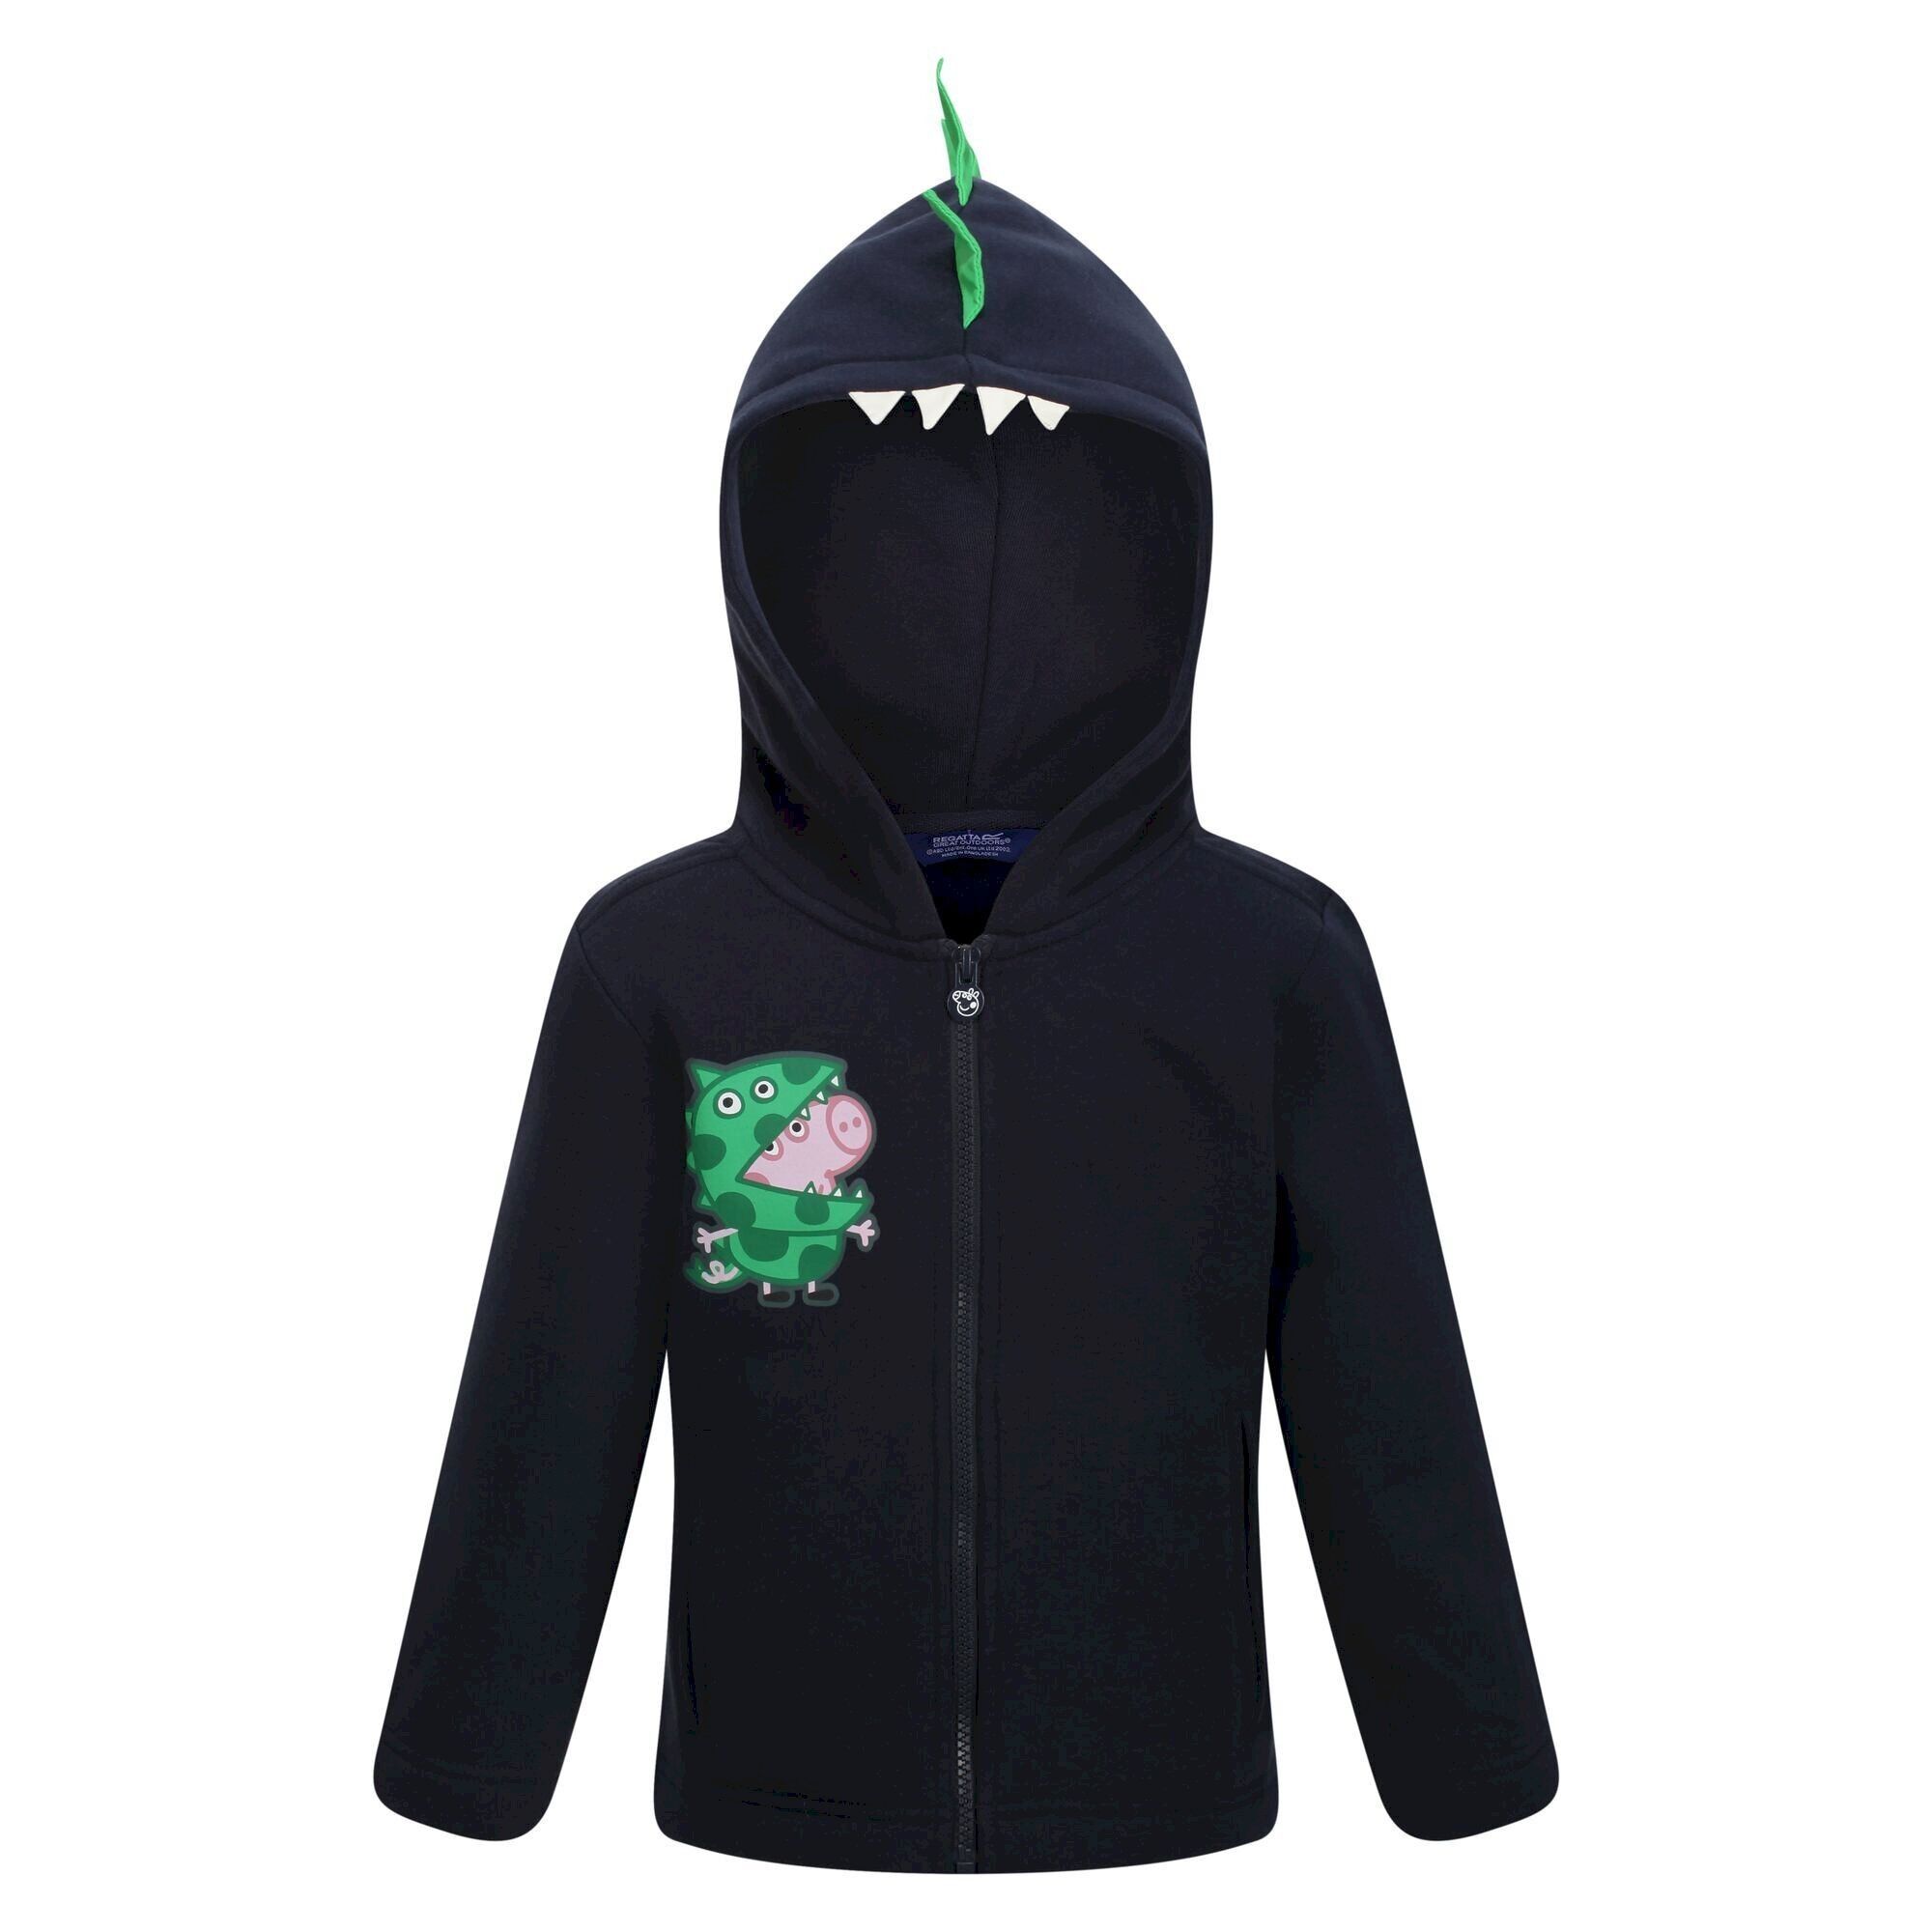 Material: 80% Cotton, 20% Polyester. Design: 3D, Dinosaur. Characters: George Pig. Hood Features: Grown On Hood. Neckline: Hooded. Sleeve-Type: Long-Sleeved. Pockets: 2 Side Pockets. Fastening: Full Zip. 100% Officially Licensed.